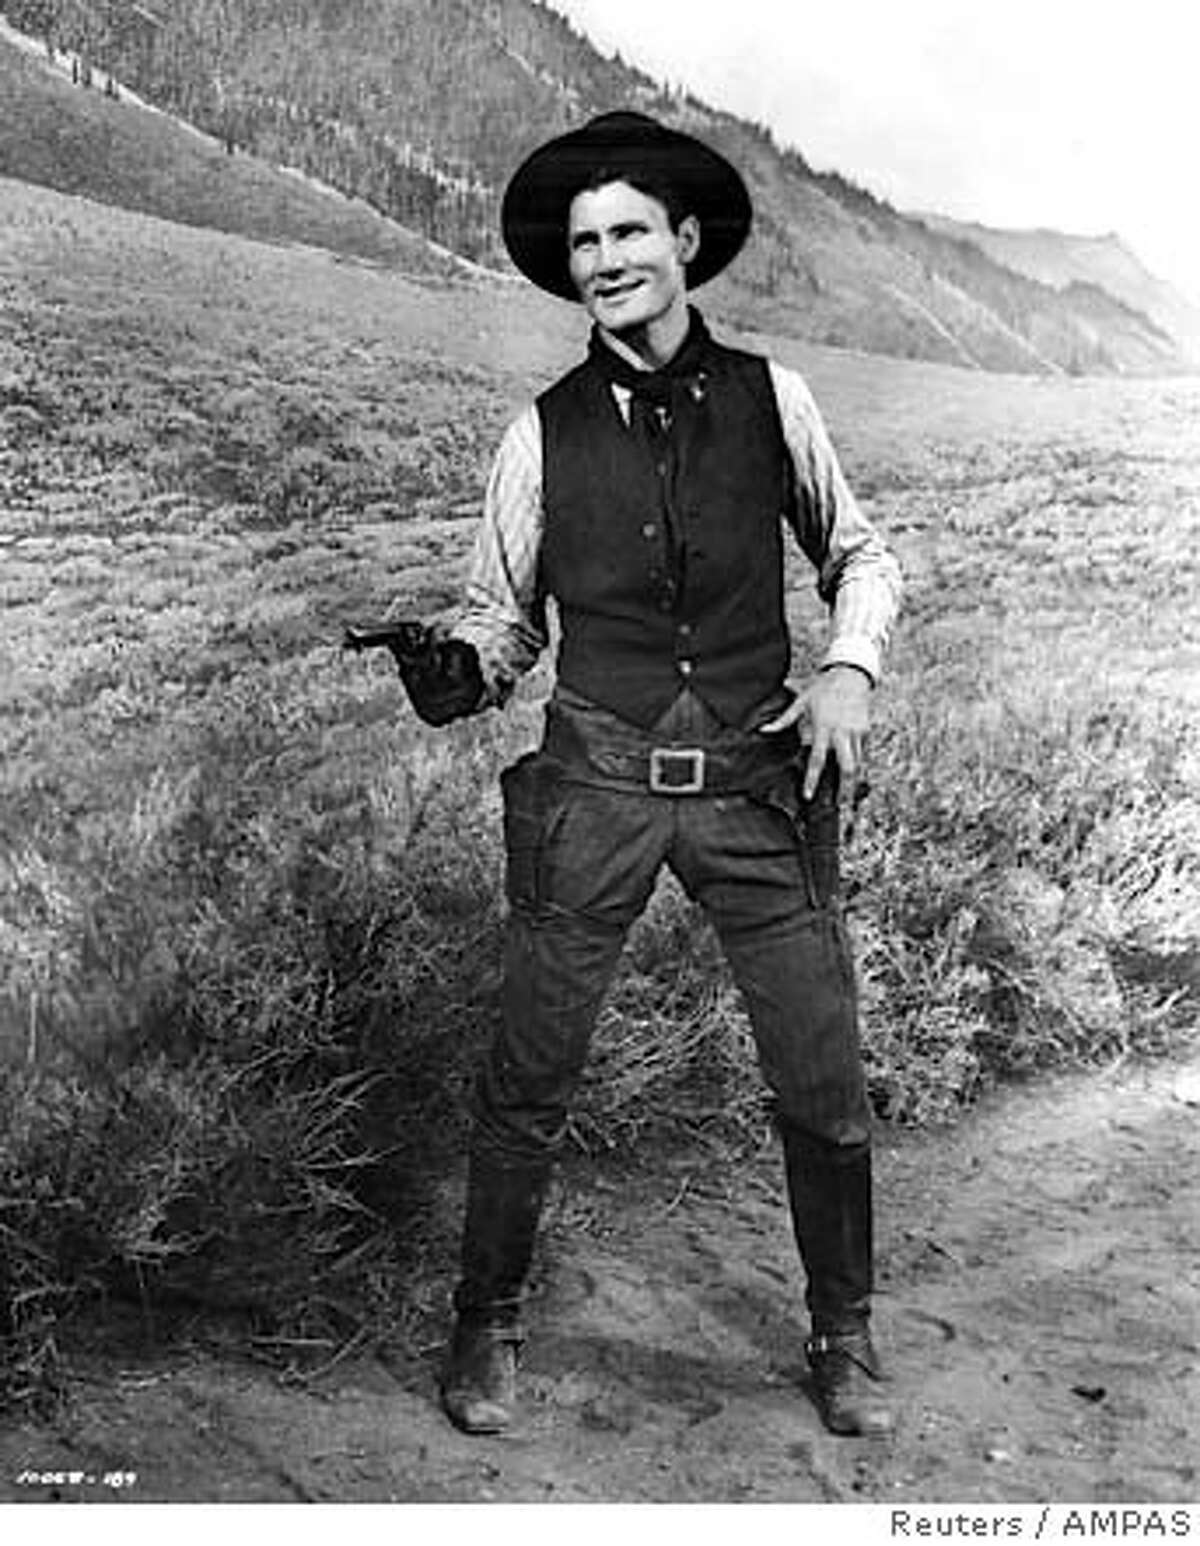 Jack Palance appears in this undated publicity photo as co-star of the 1953 western "Shane," directed by George Stevens. Oscar-winning actor Palance, who starred as a heartless gunslinger in "Shane," died at his California home on November 10, 2006 at age 87, his spokesman said. NO ARCHIVES EDITORIAL USE ONLY REUTERS/AMPAS/Handout (UNITED STATES)